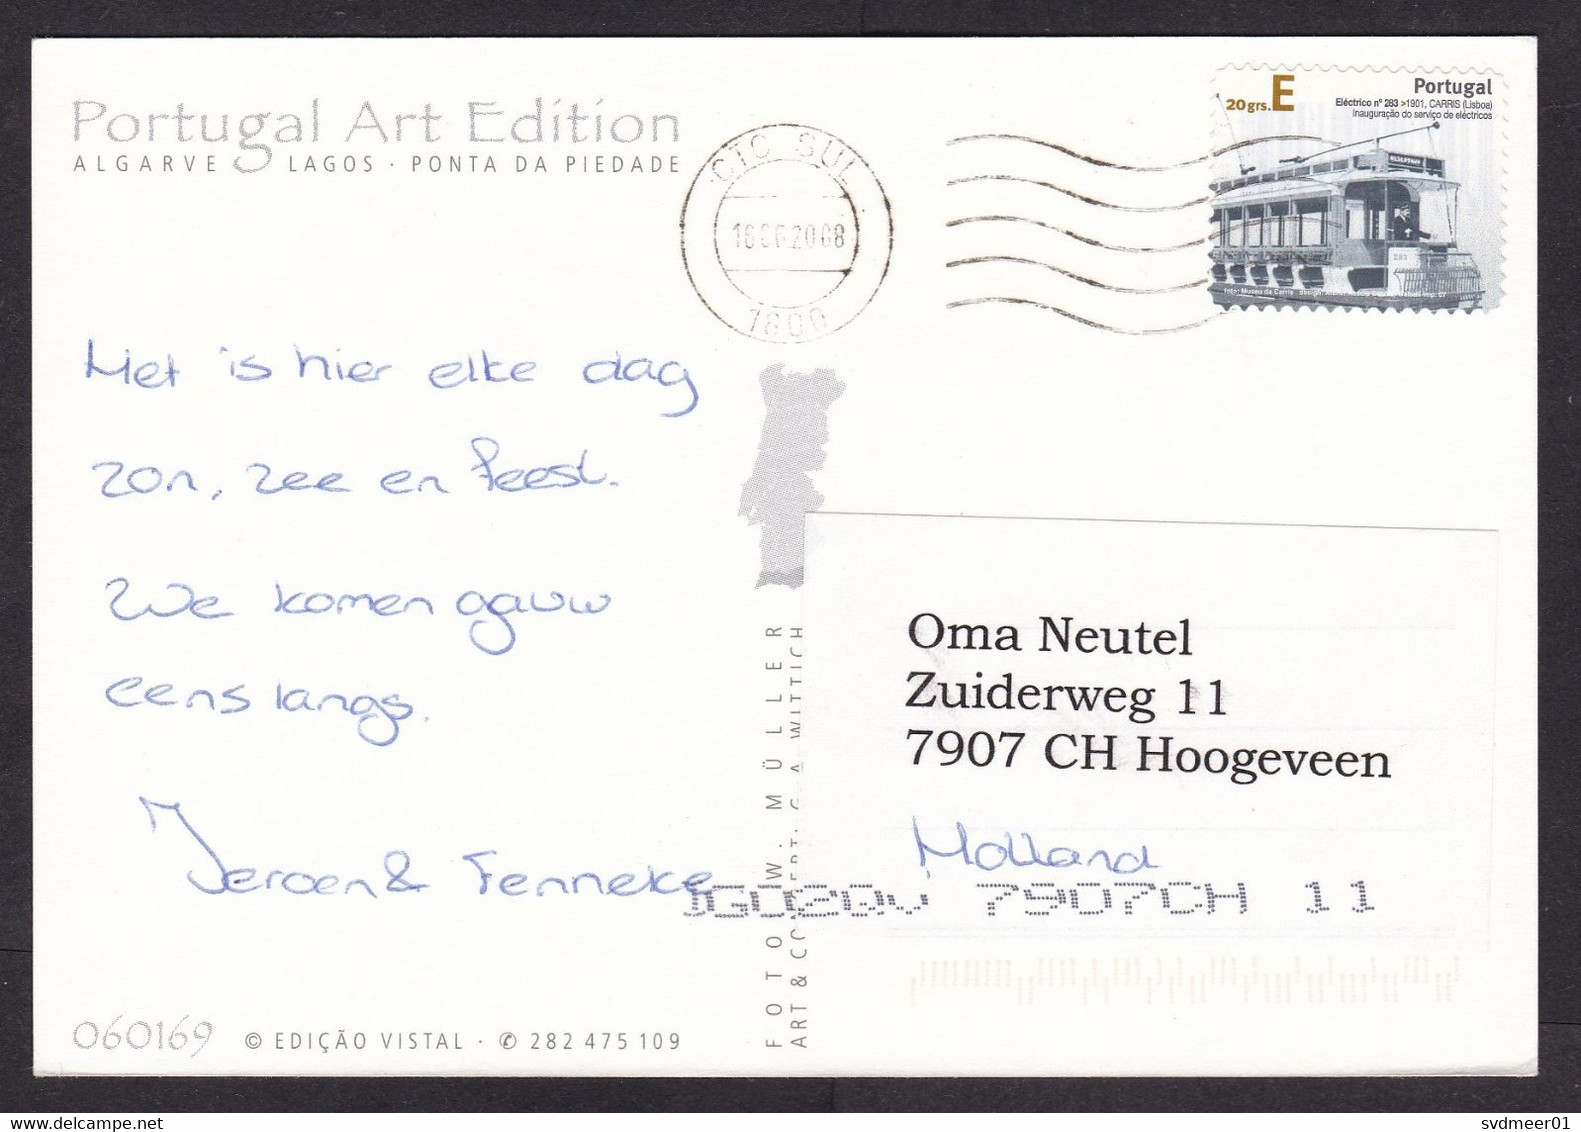 Portugal: Picture Postcard To Netherlands, 2008, 1 Stamp, Tram Trolley Car, Public Transport, E Rate (traces Of Use) - Briefe U. Dokumente